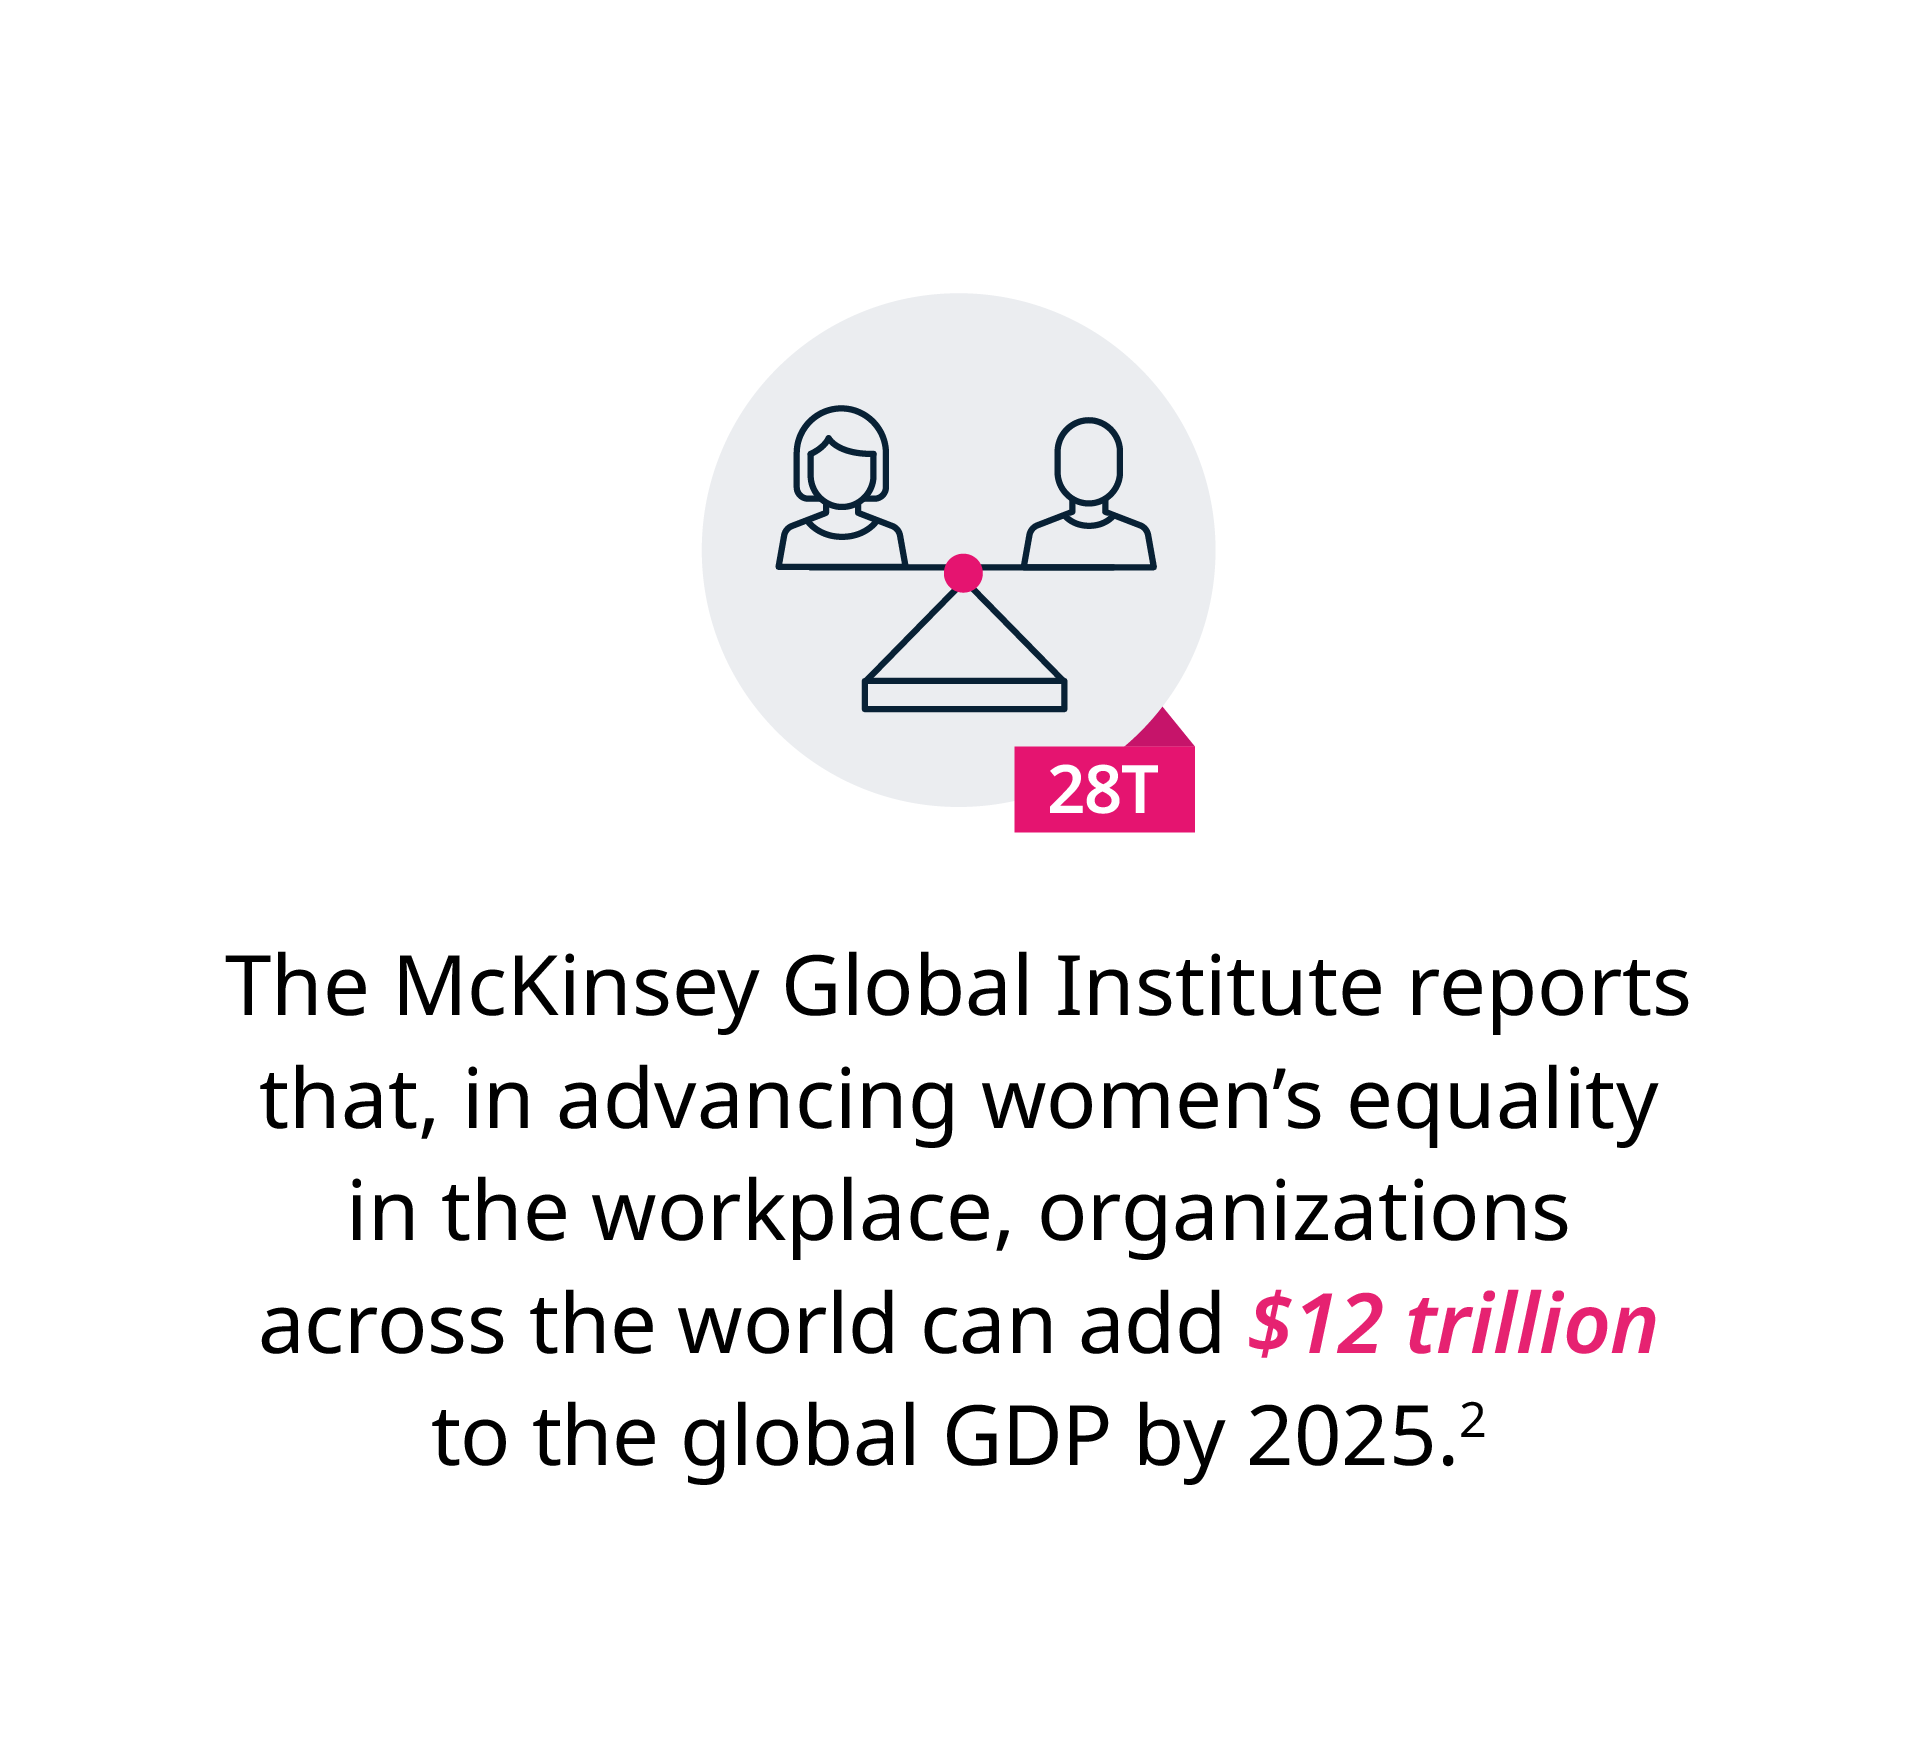 The McKinsey Global Institute reports that in advancing women's equality in the workplace, organizations across the world can add $12 Trillion to the global GDP by 2025.